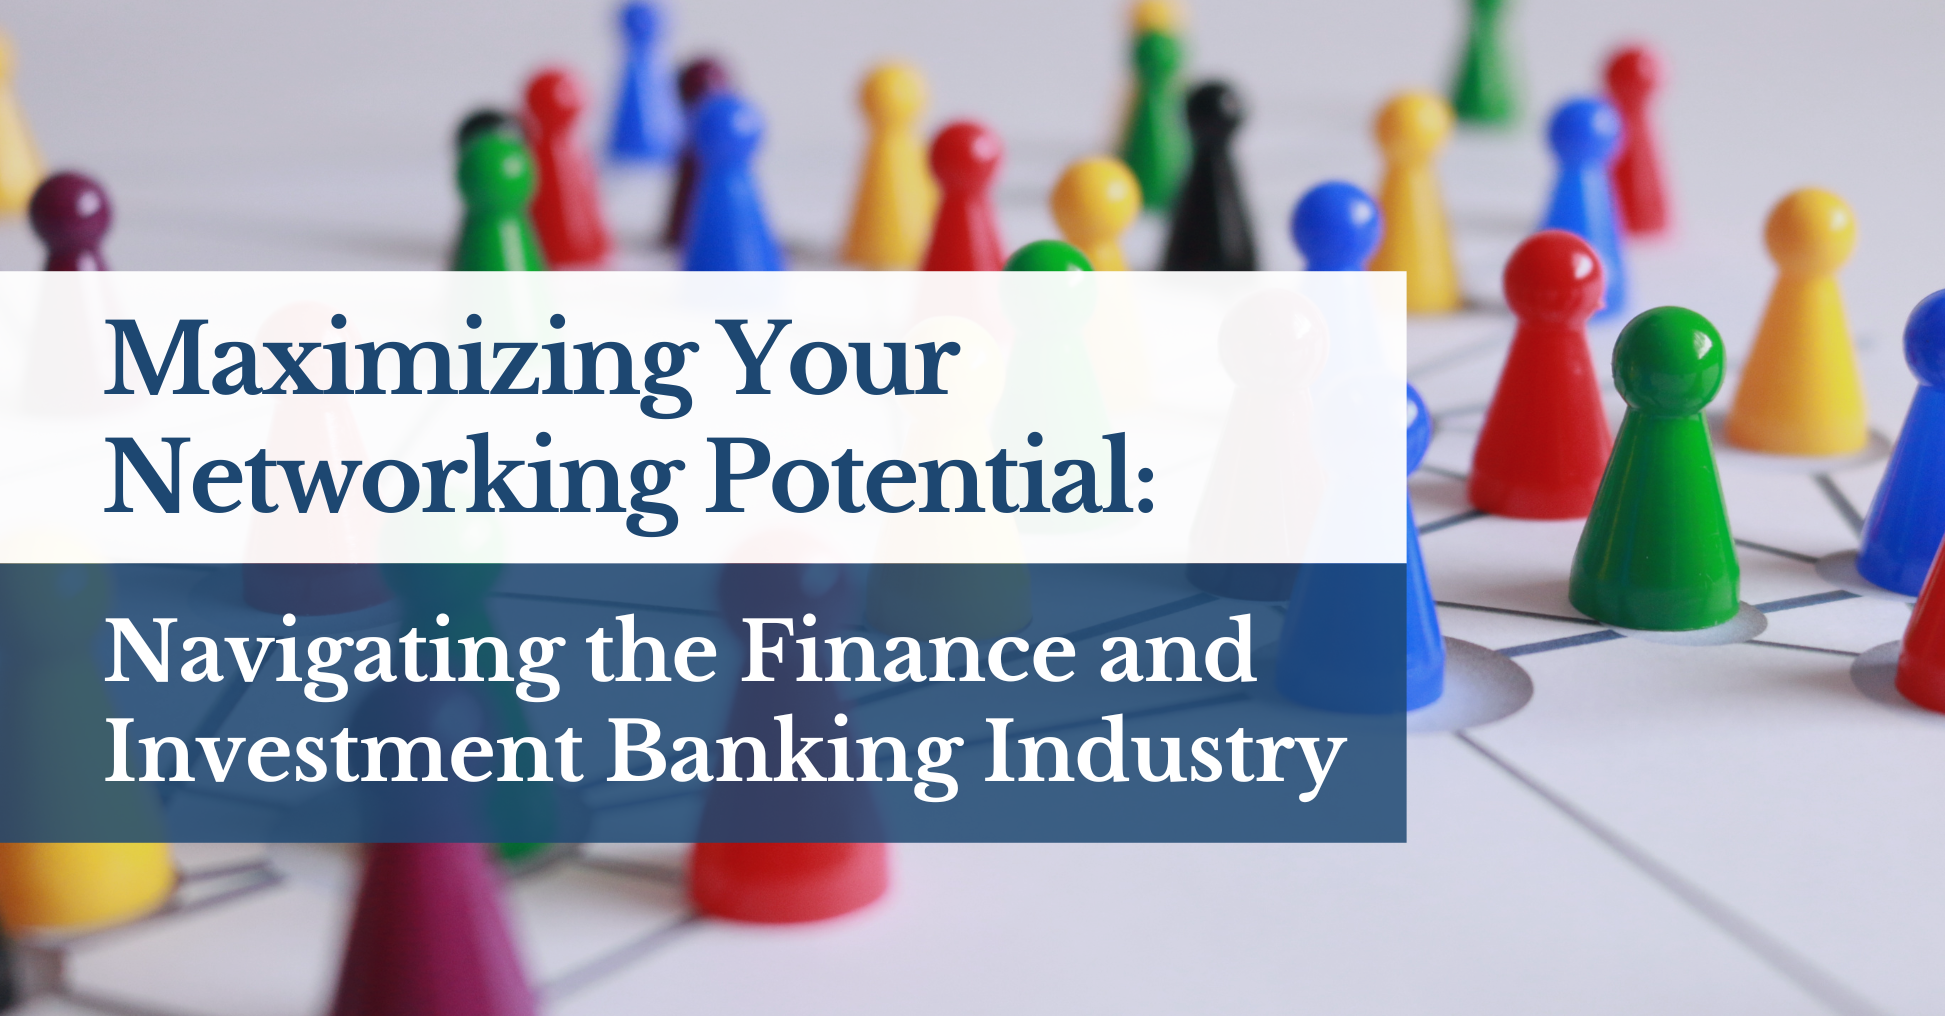 Maximizing Your Networking Potential: Navigating the Finance and Investment Banking Industry